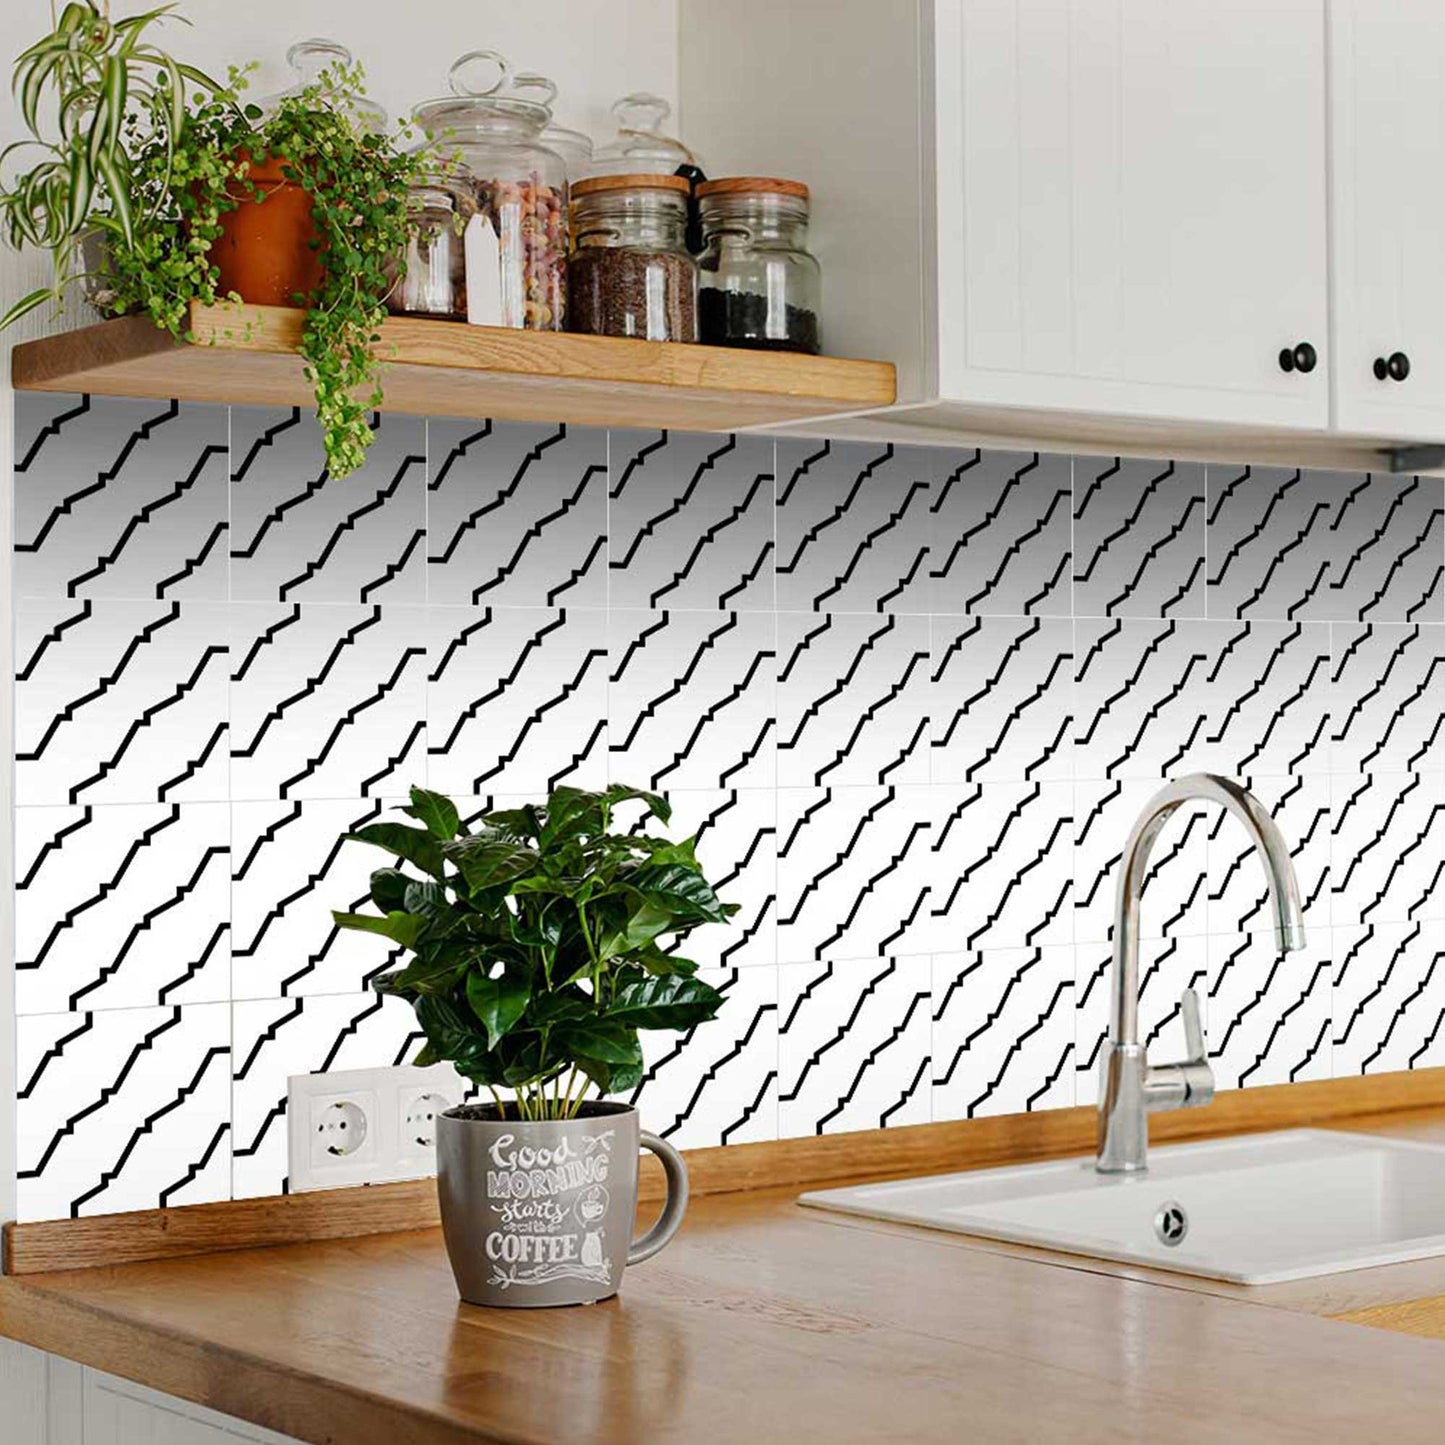 4" X 4" Black and White XL Prism Peel and Stick Removable Tiles